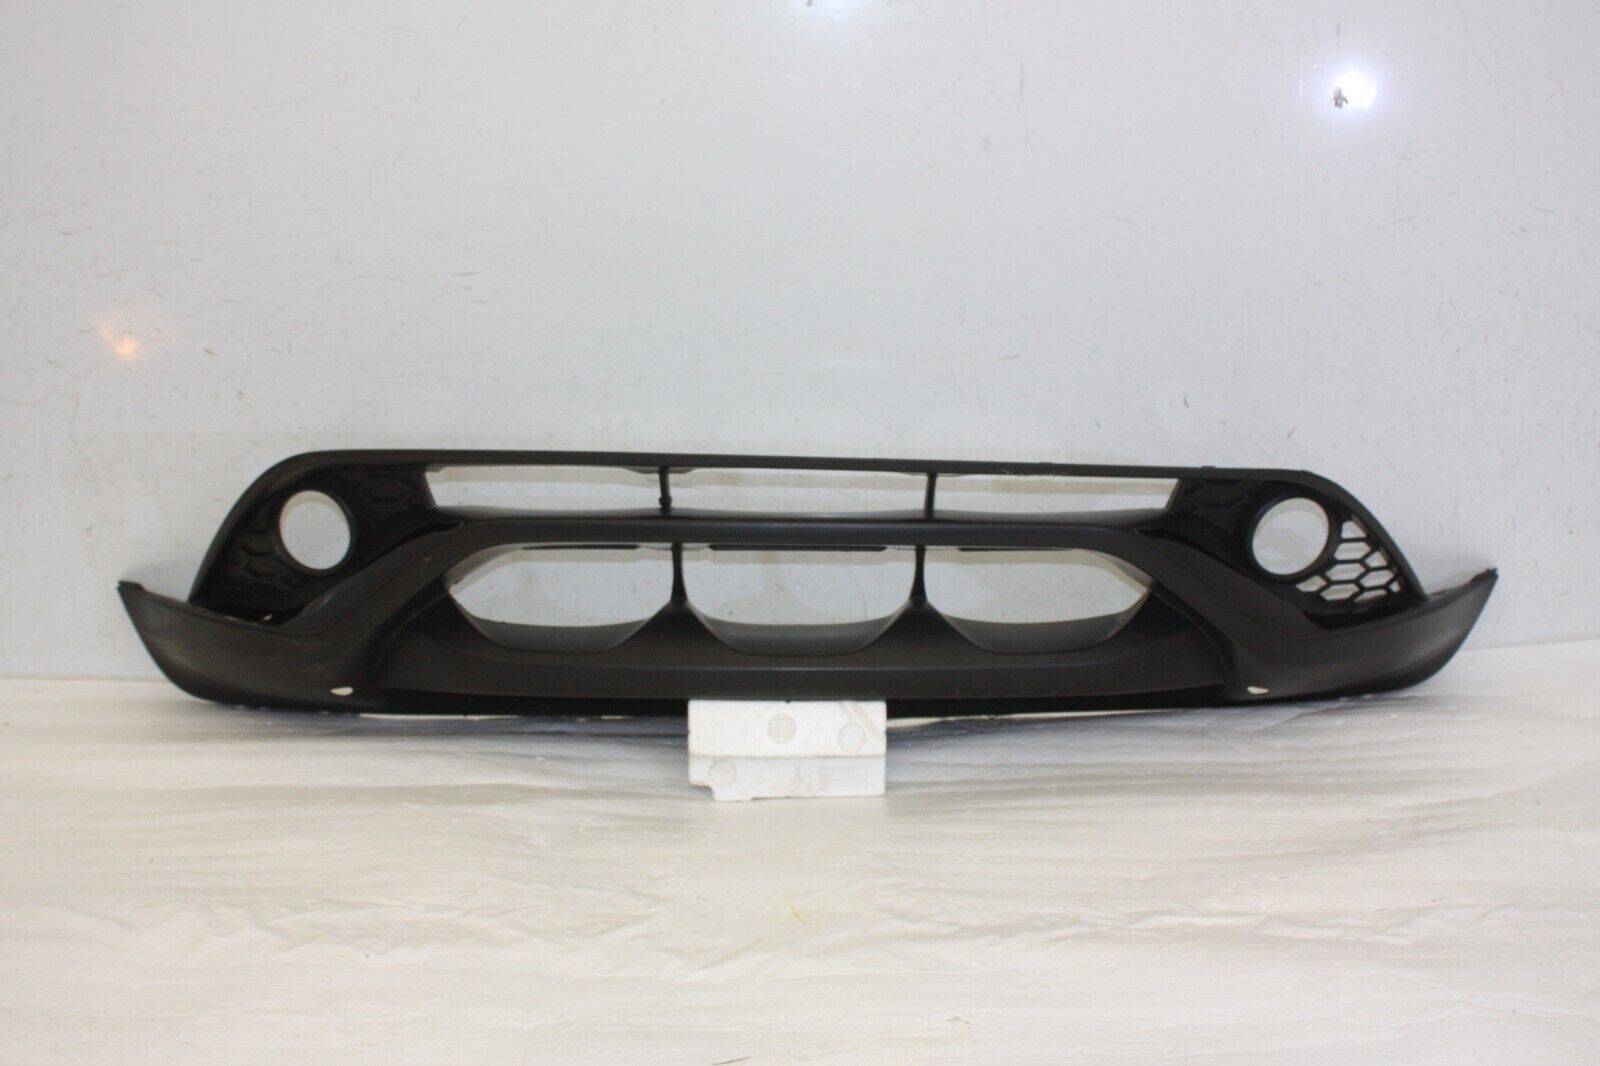 Nissan Juke F15 Front Bumper Lower Section 2014 TO 2019 62026 BV80A Genuine 176262711980